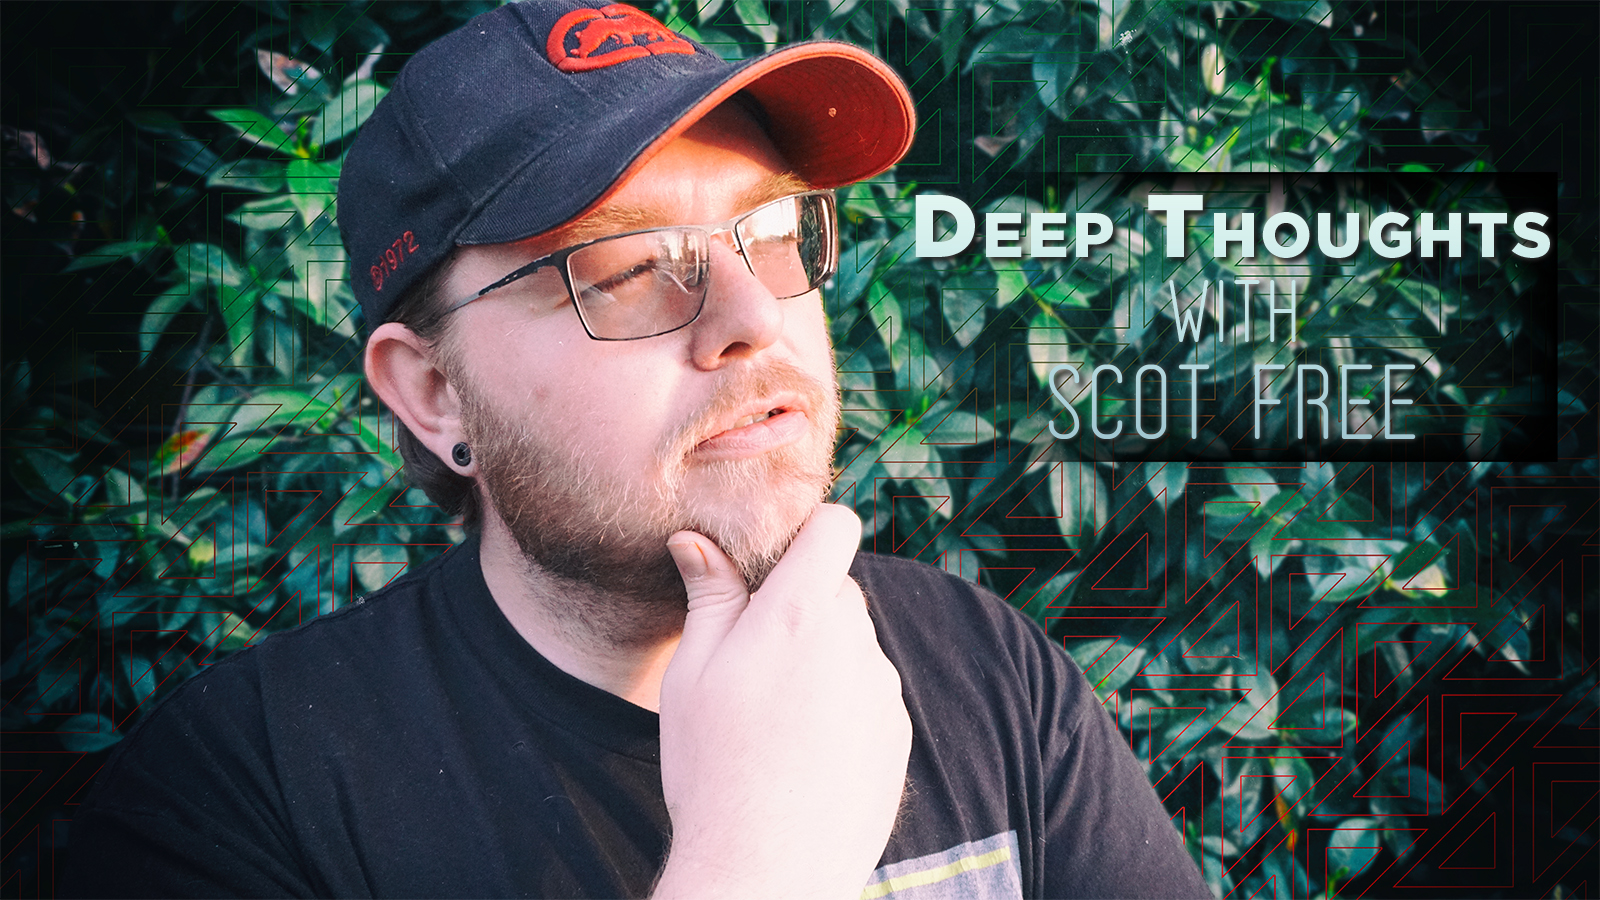 Deep Thoughts with Scot Free Feb 2019